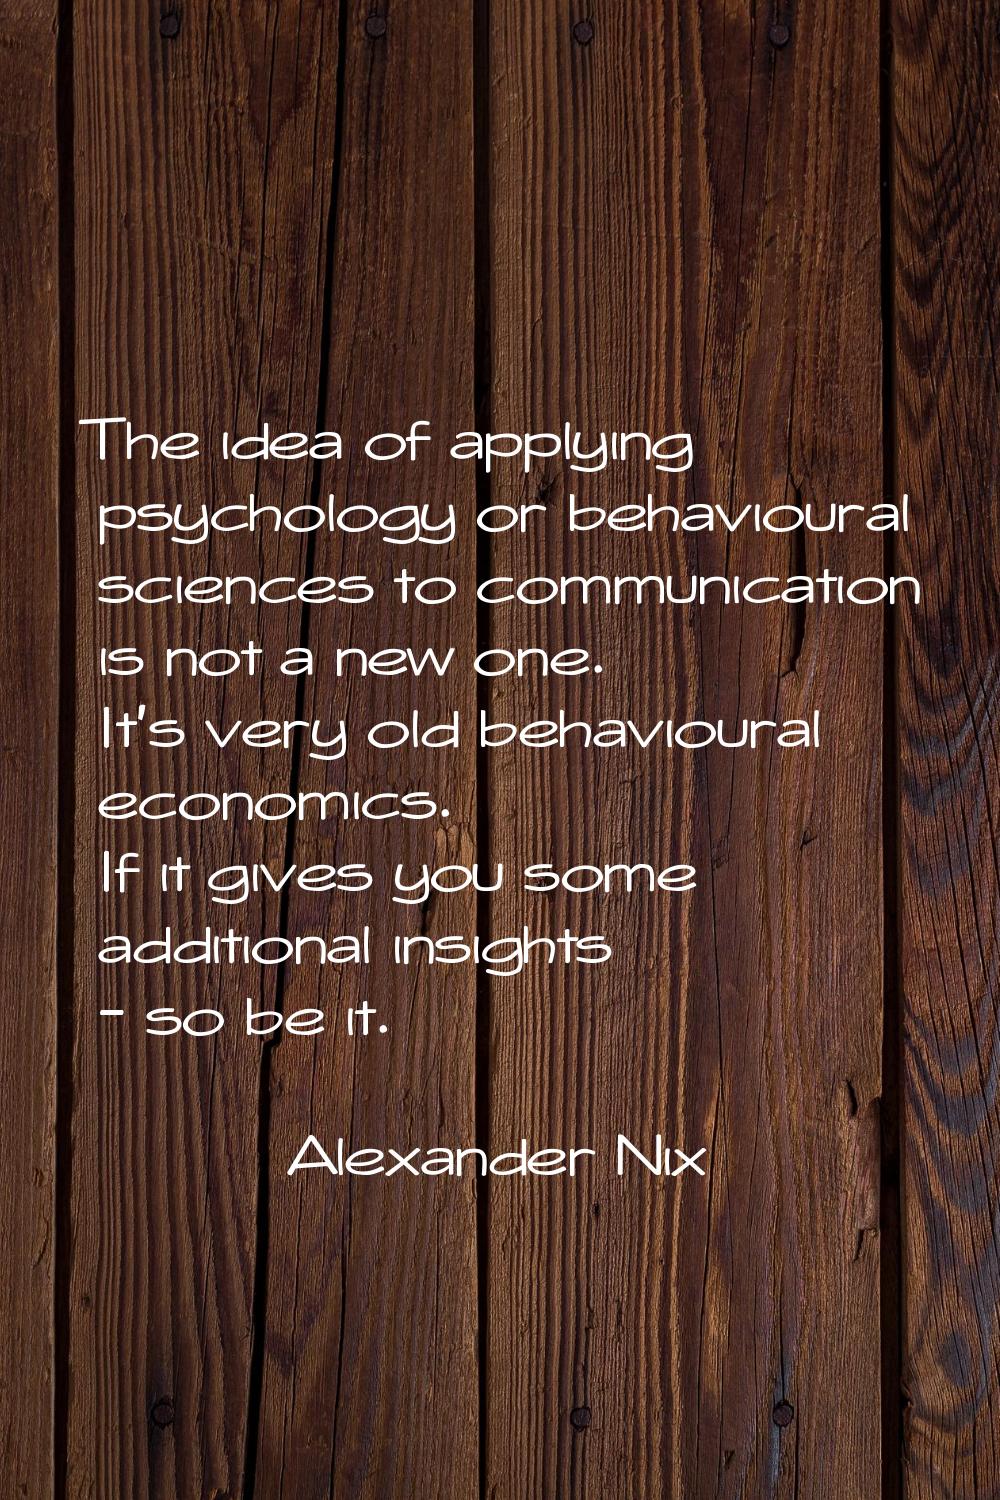 The idea of applying psychology or behavioural sciences to communication is not a new one. It's ver